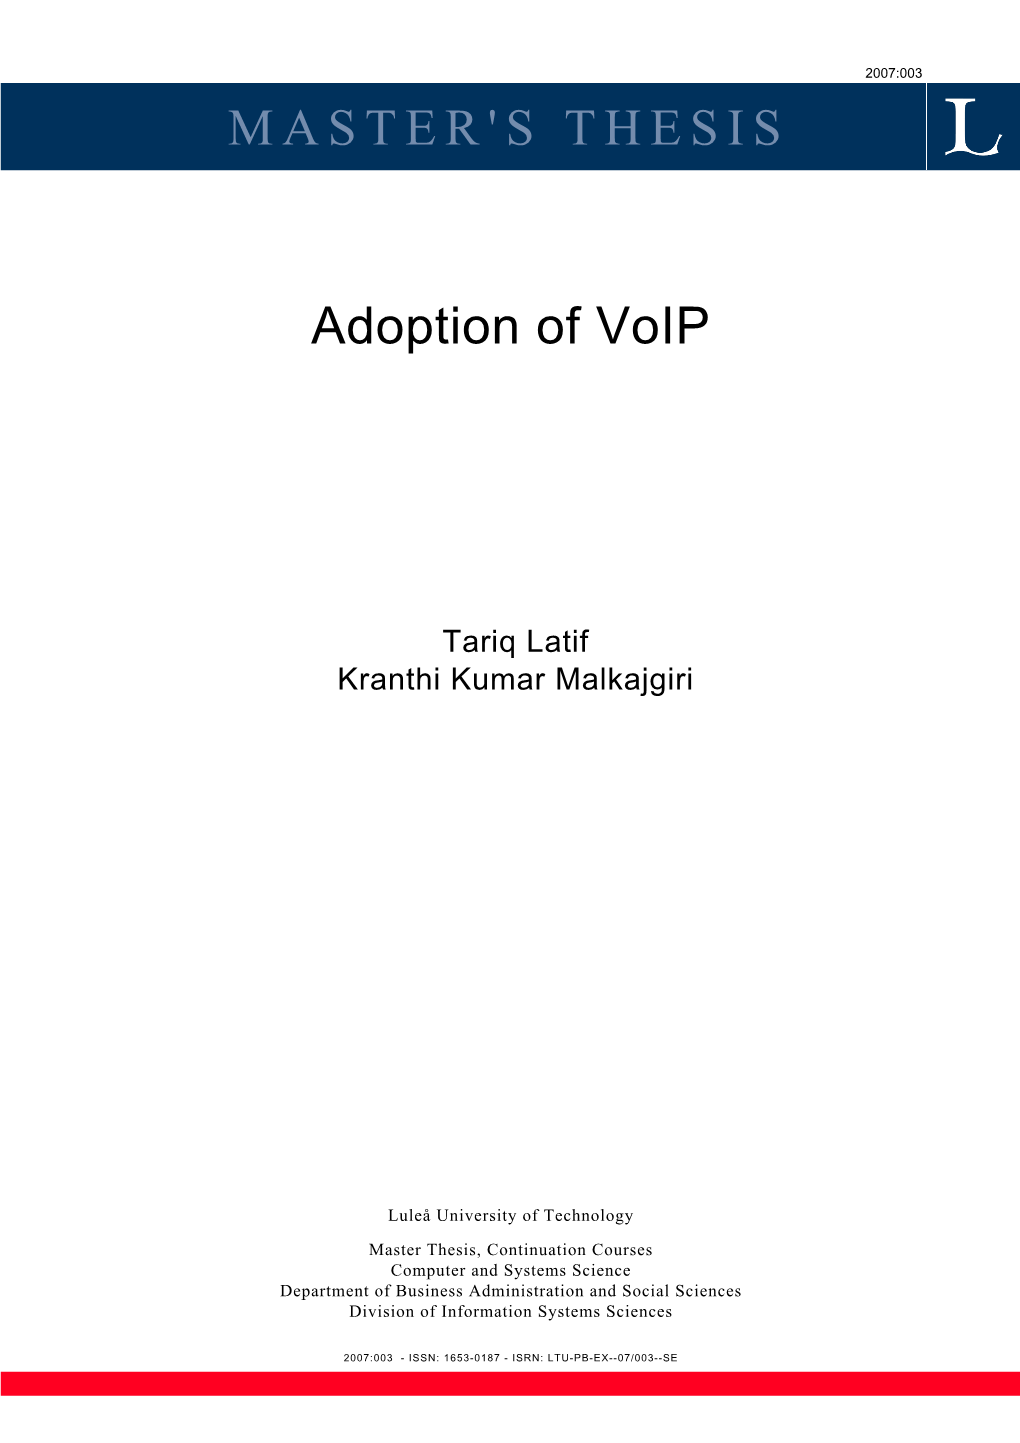 MASTER's THESIS Adoption of Voip